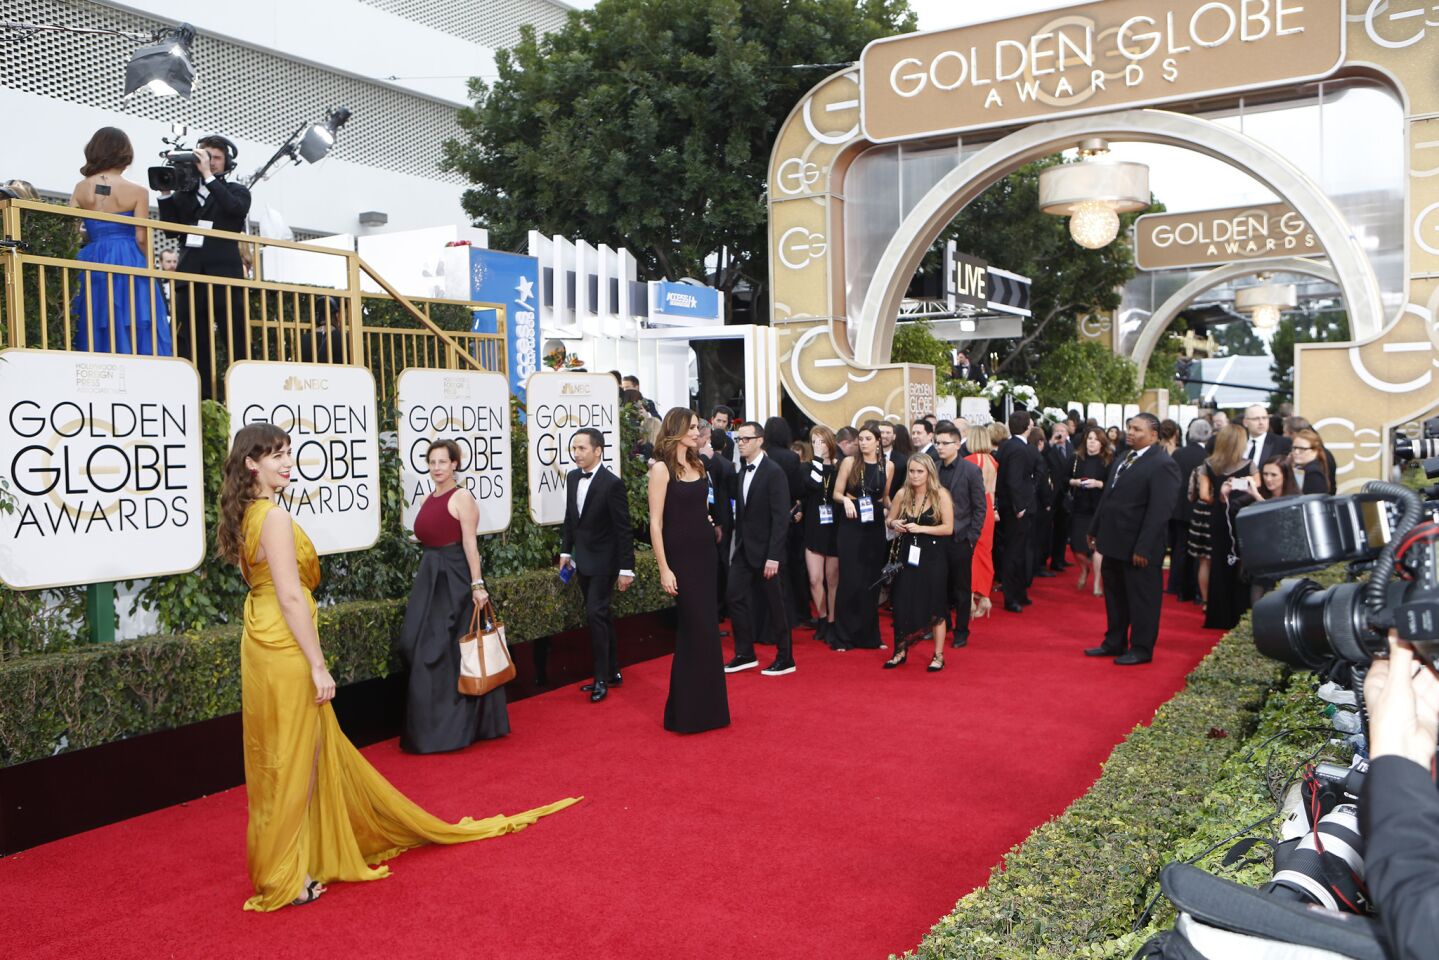 Lola Kirke poses on the red carpet at the 73rd Golden Globe Awards show at the Beverly Hilton Hotel.